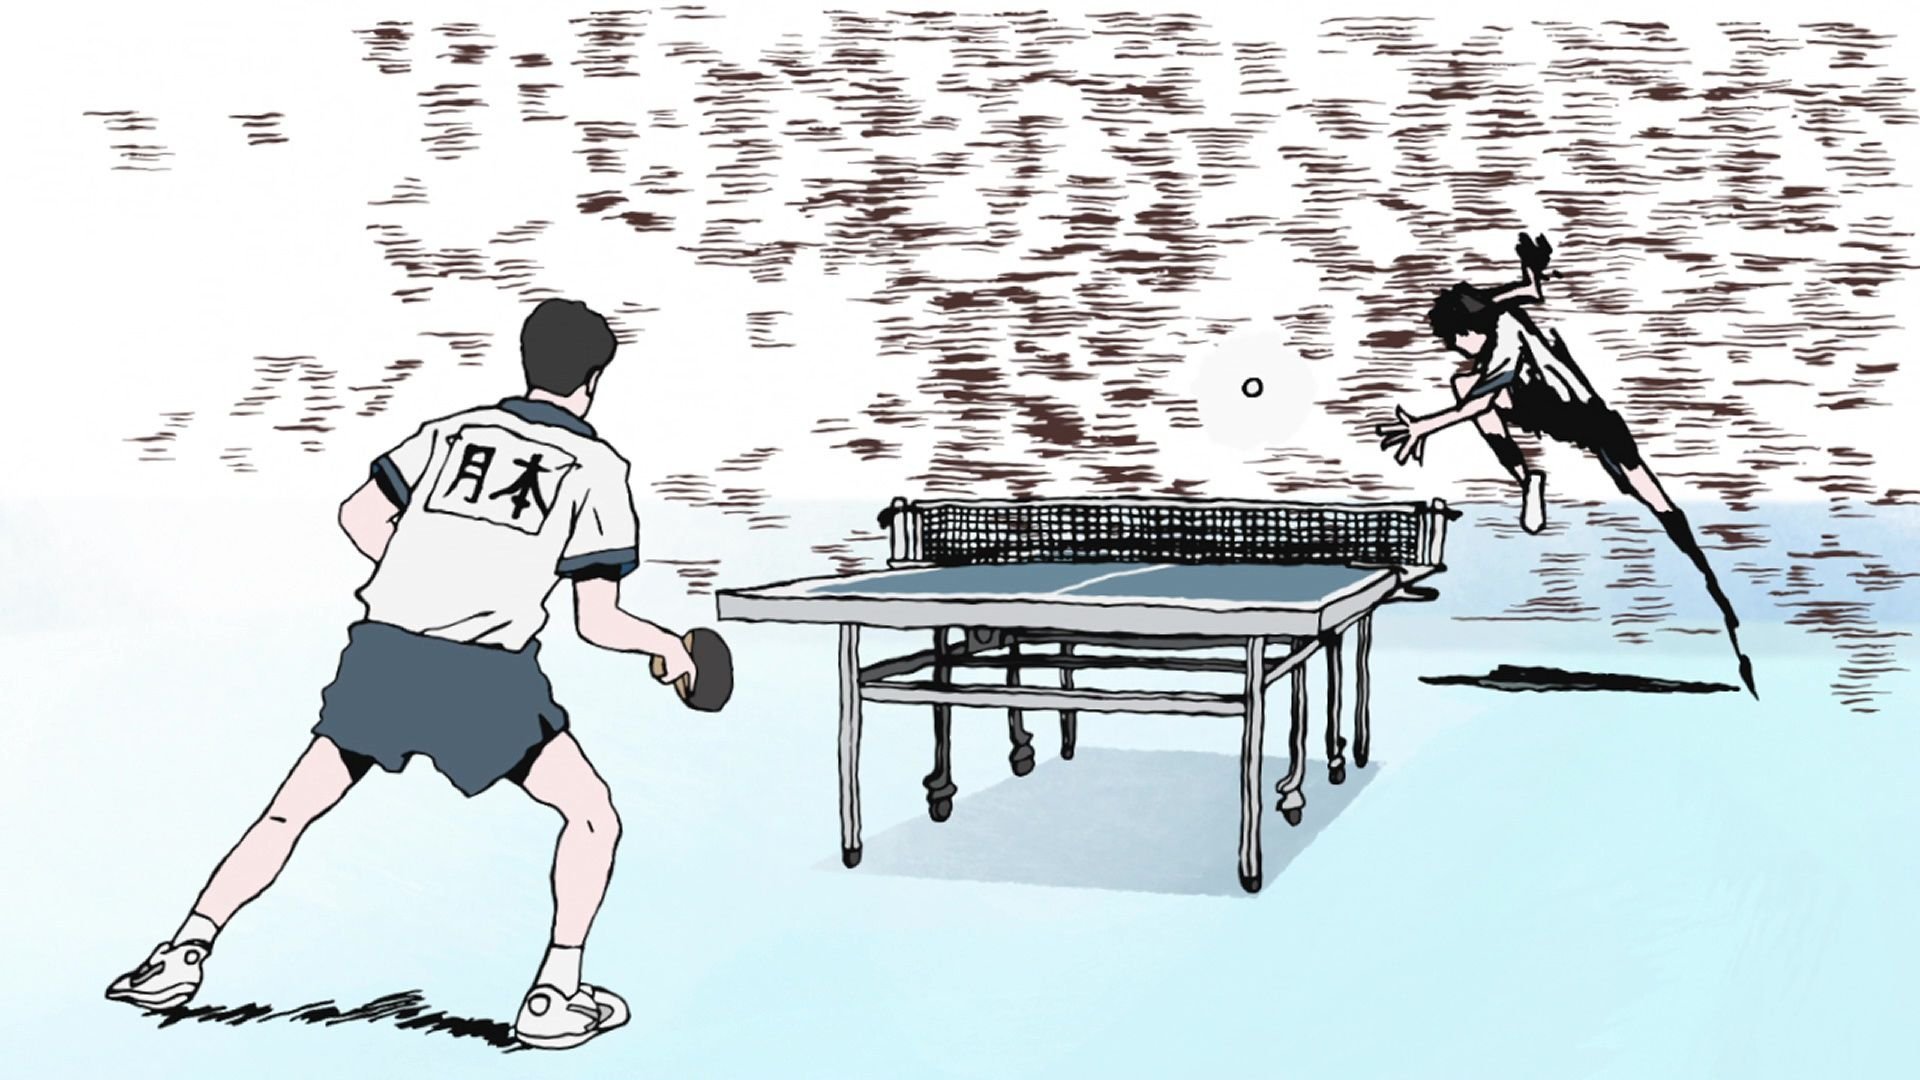 Ping pong with ding dong